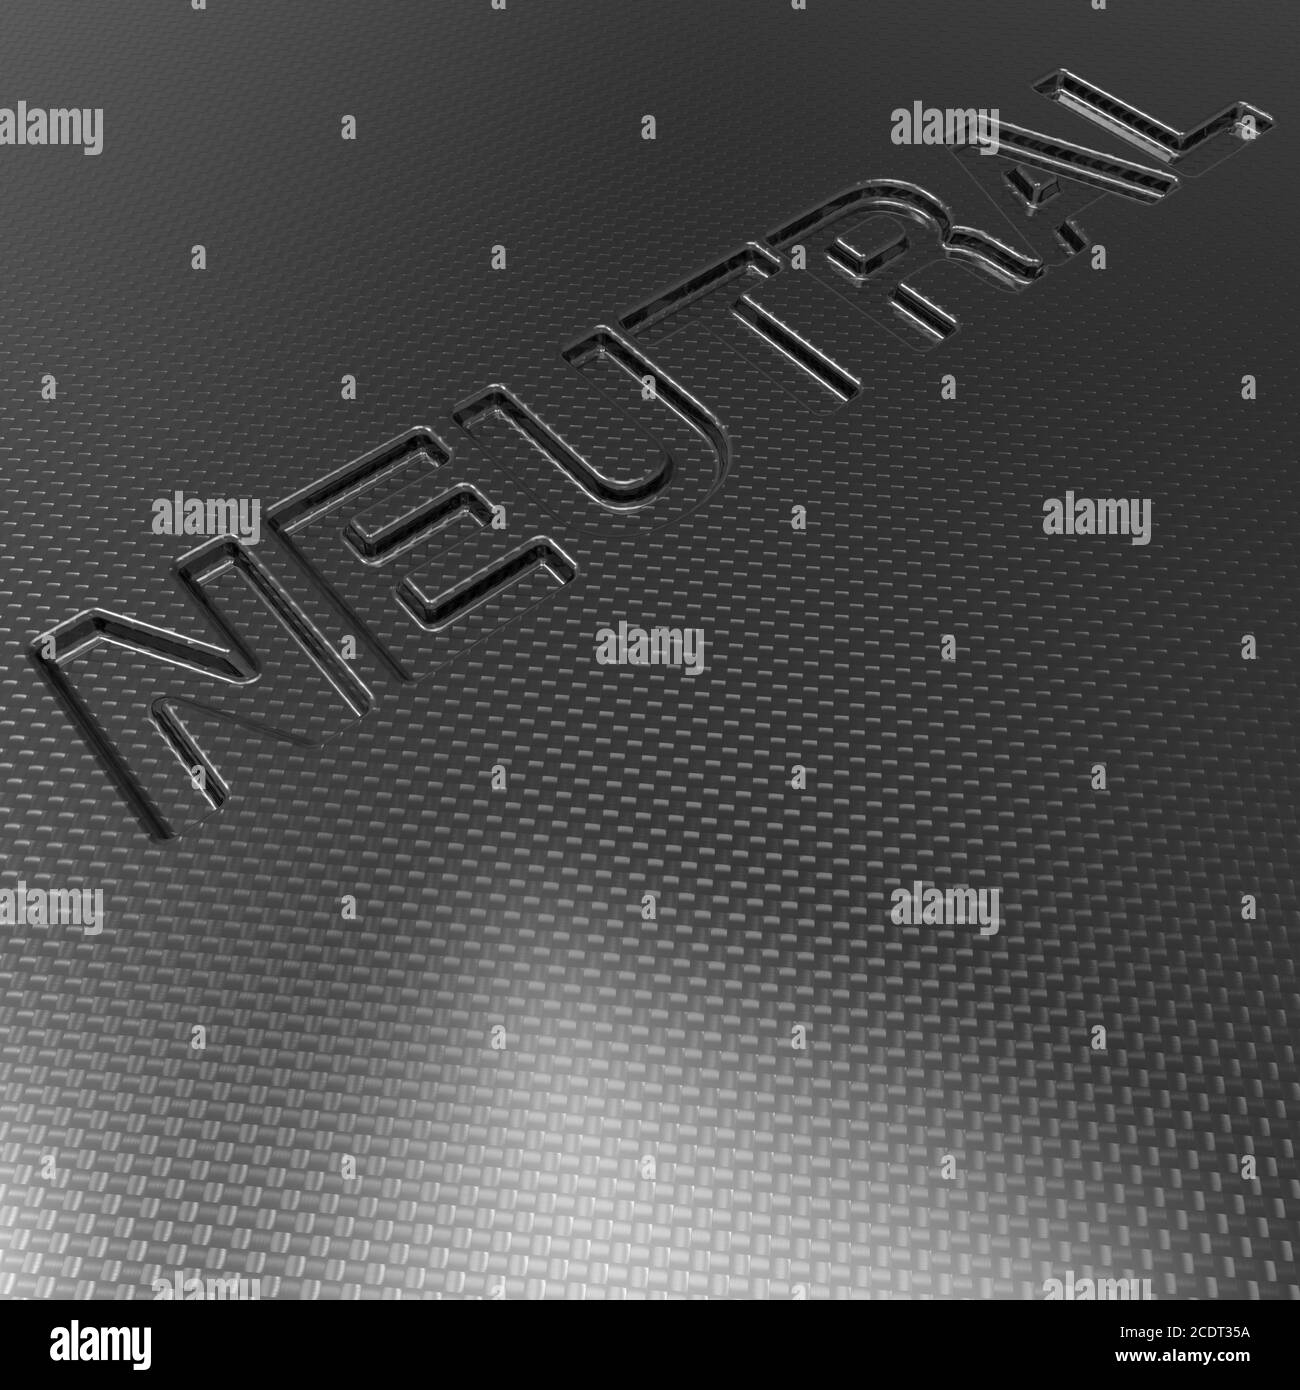 Word Neutral debossed in a sheet of carbon fiber laminate Stock Photo